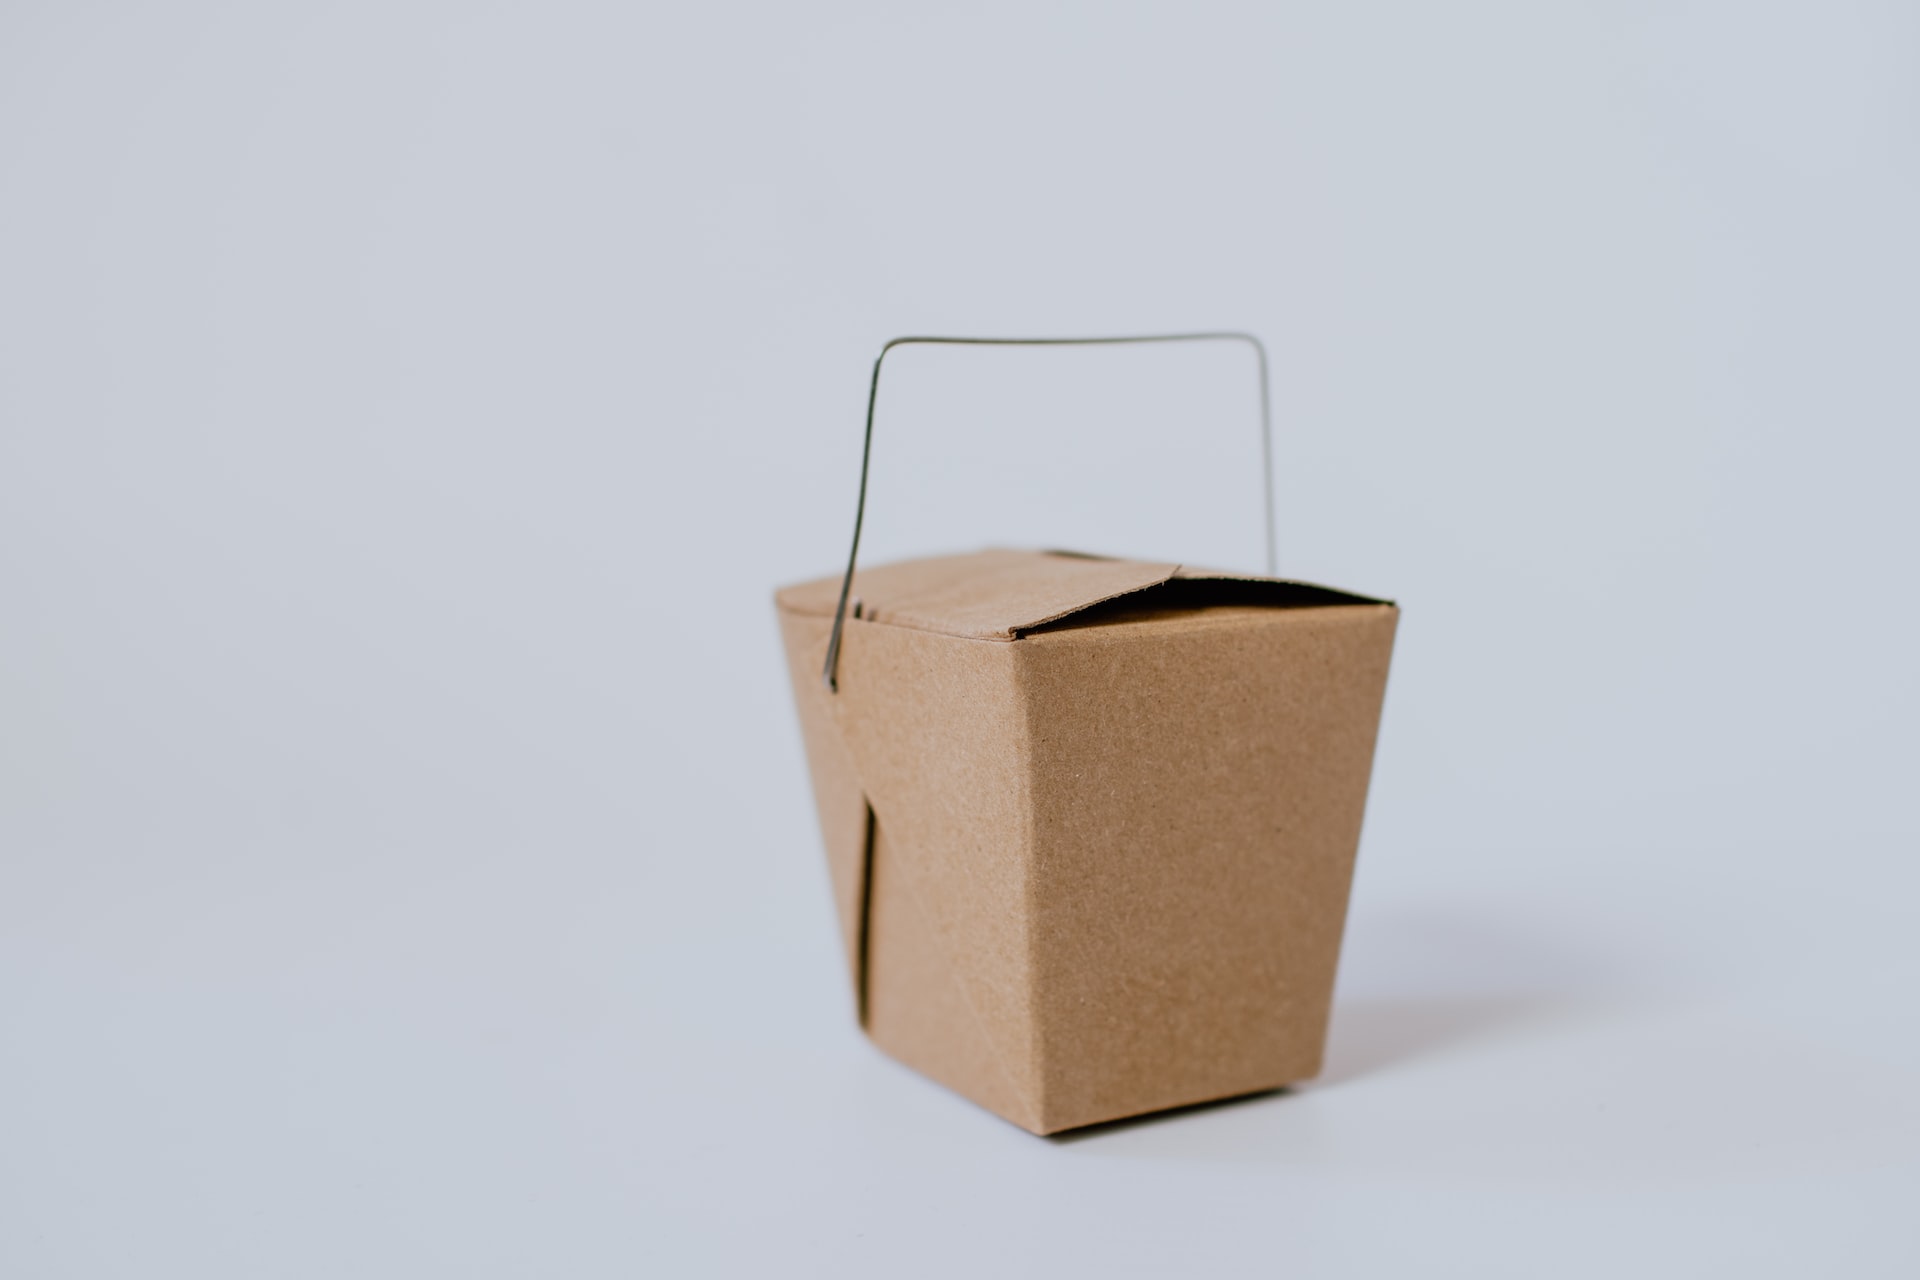 A brown takeout container